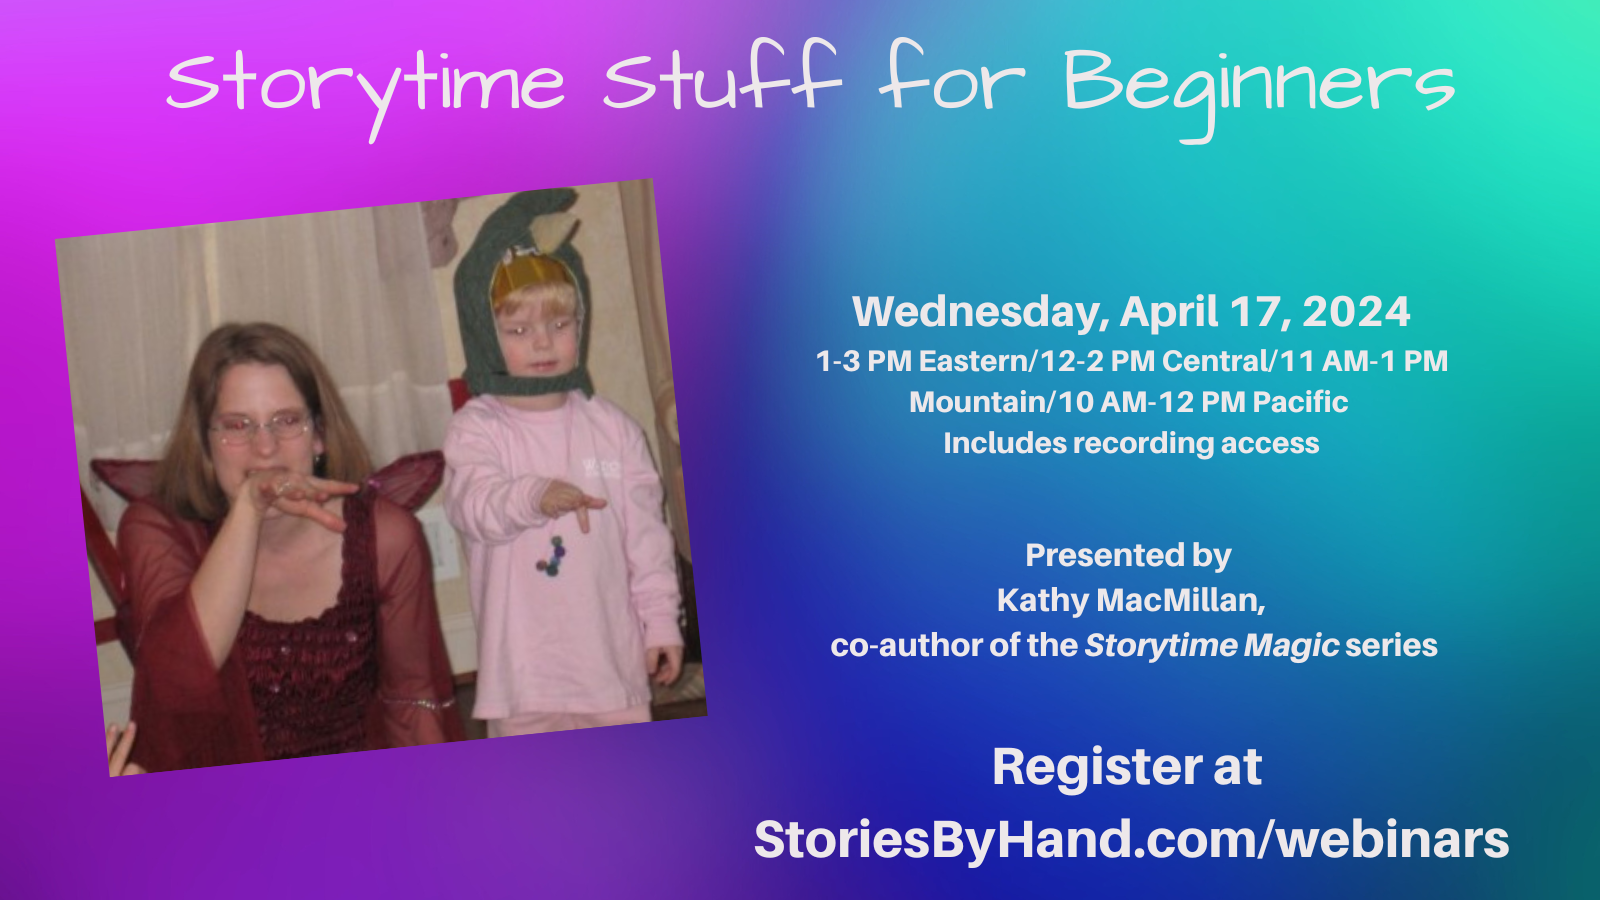 A White woman with light brown hair and glasses signs DRAGON. Next to her, a preschoolers wearing a dragon hood signs it too. Text reads: Storytime Stuff for Beginners. Wednesday, April 17, 2024. 1-3 PM Eastern/12-2 PM Central/11 AM-1 PM Mountain/10 AM-12 PM Pacific. Includes recording access. Presented by Kathy MacMillan, co-author of the Storytime Magic series. Register at StoriesByhand.com/webinars.